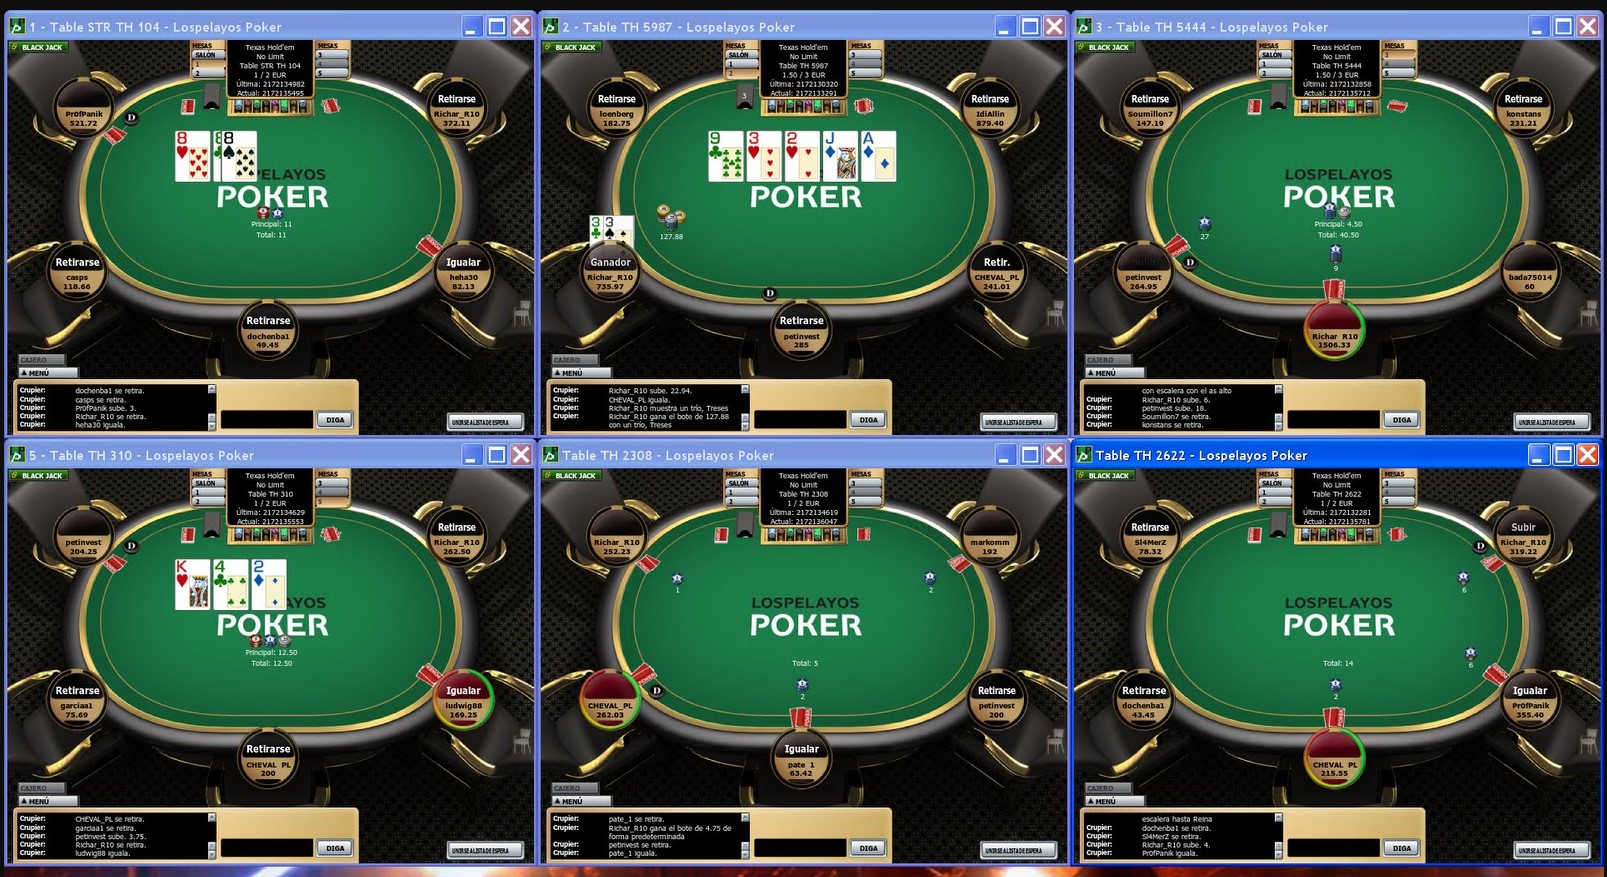 What You Should Know Before Playing in an Online Poker Tournament